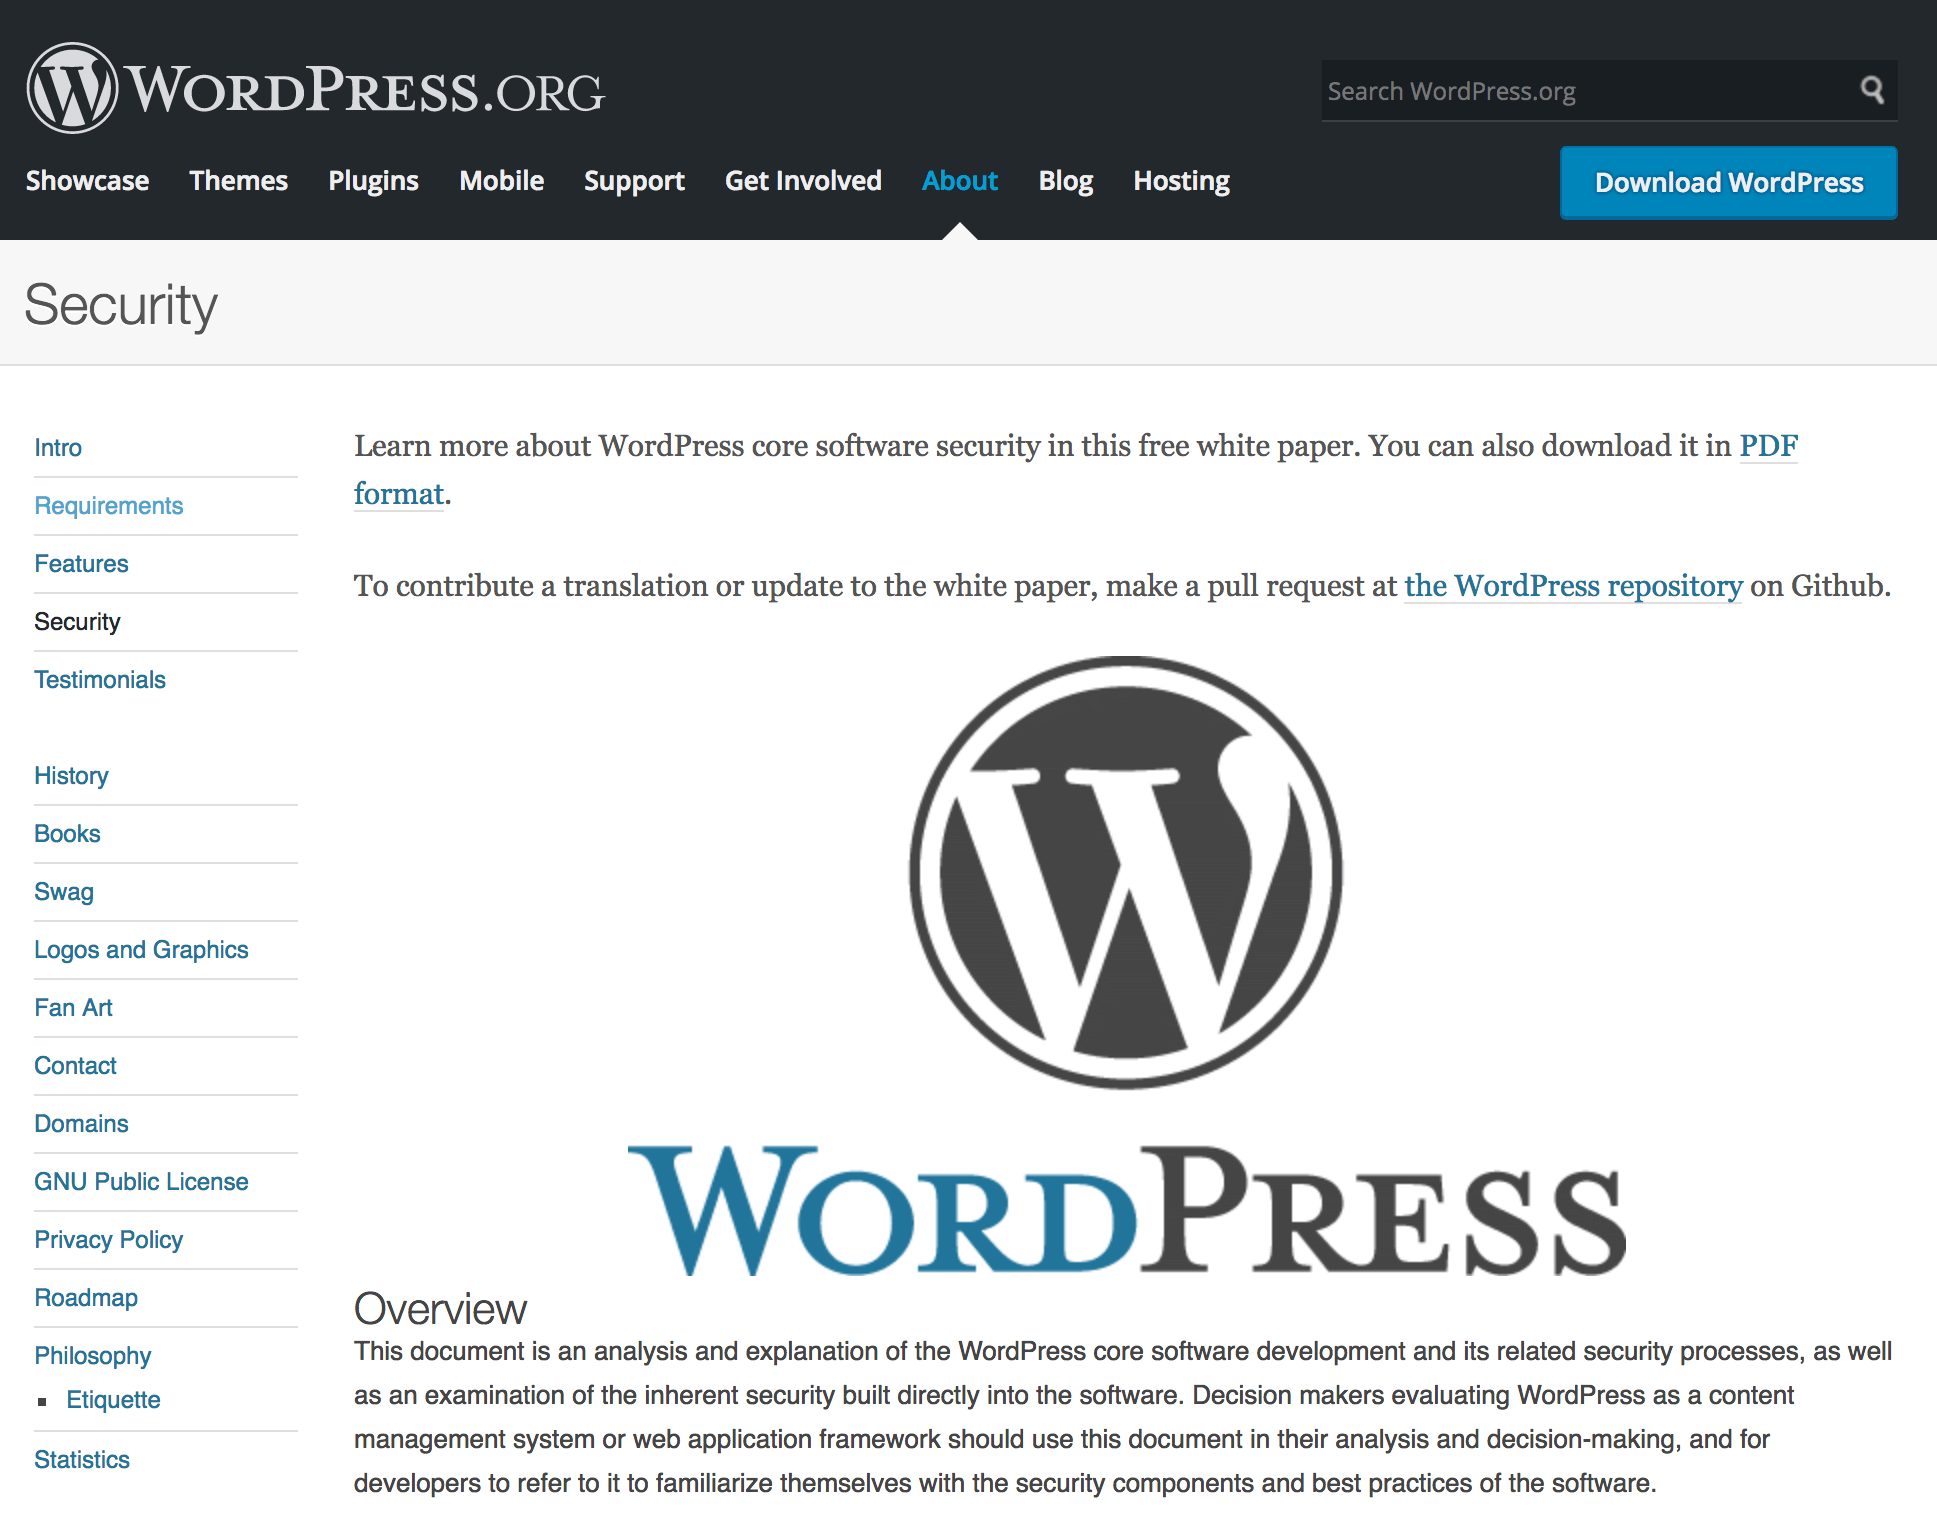 The WordPress security page.